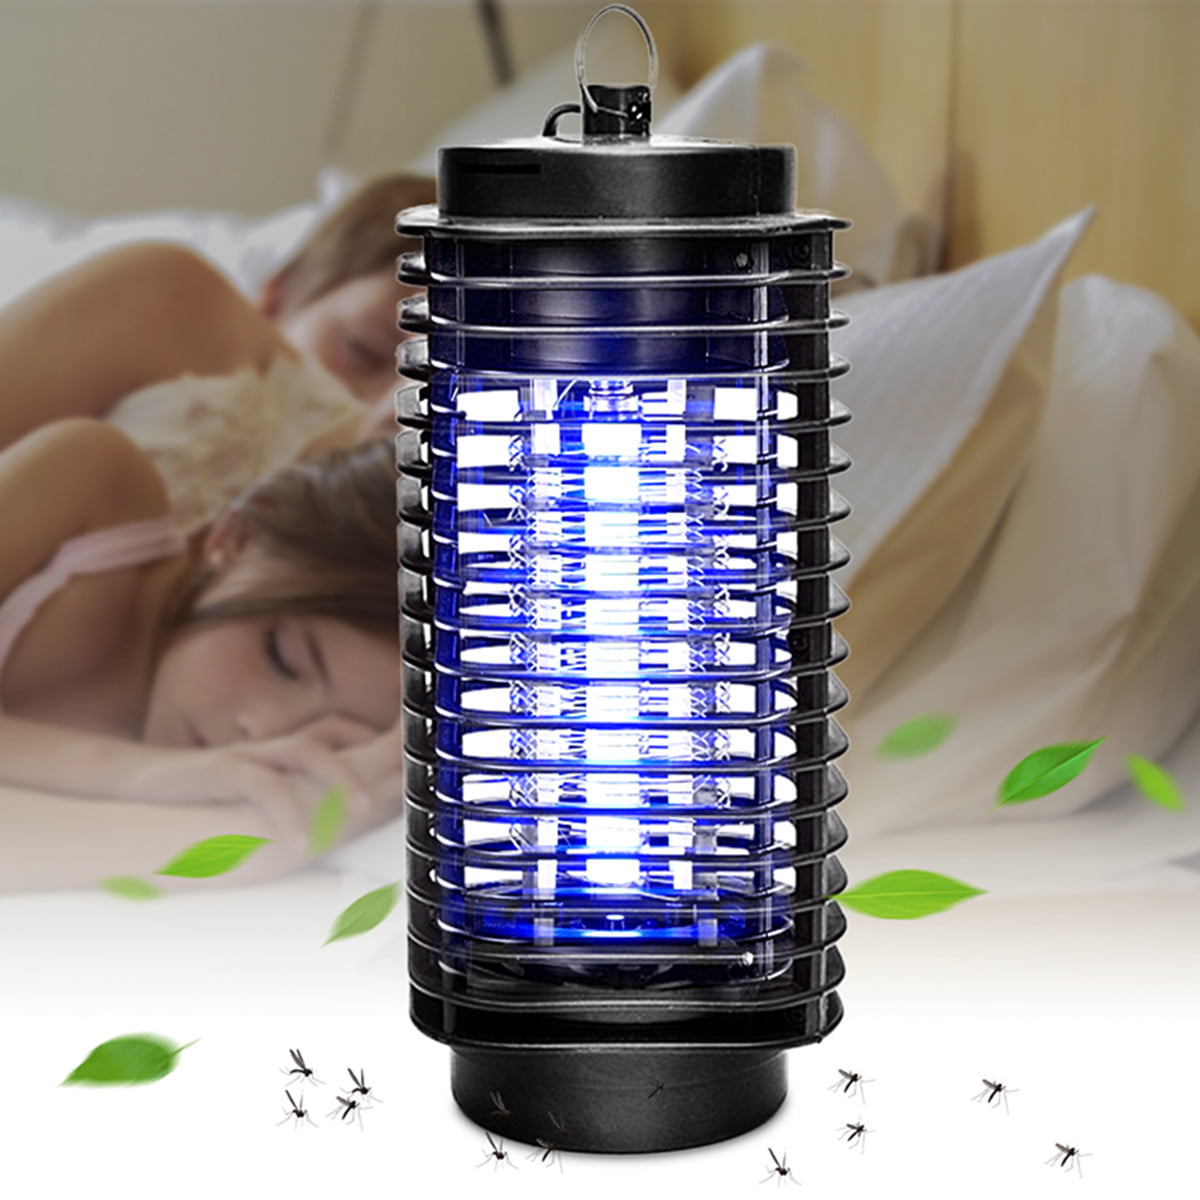 Electric Fly Bug Zapper Mosquito Insect Killer LED Light Trap Lamp Pest Control with Cleaning Brush and Mosquito Repellent bracelet for Outdoor and Indoor 